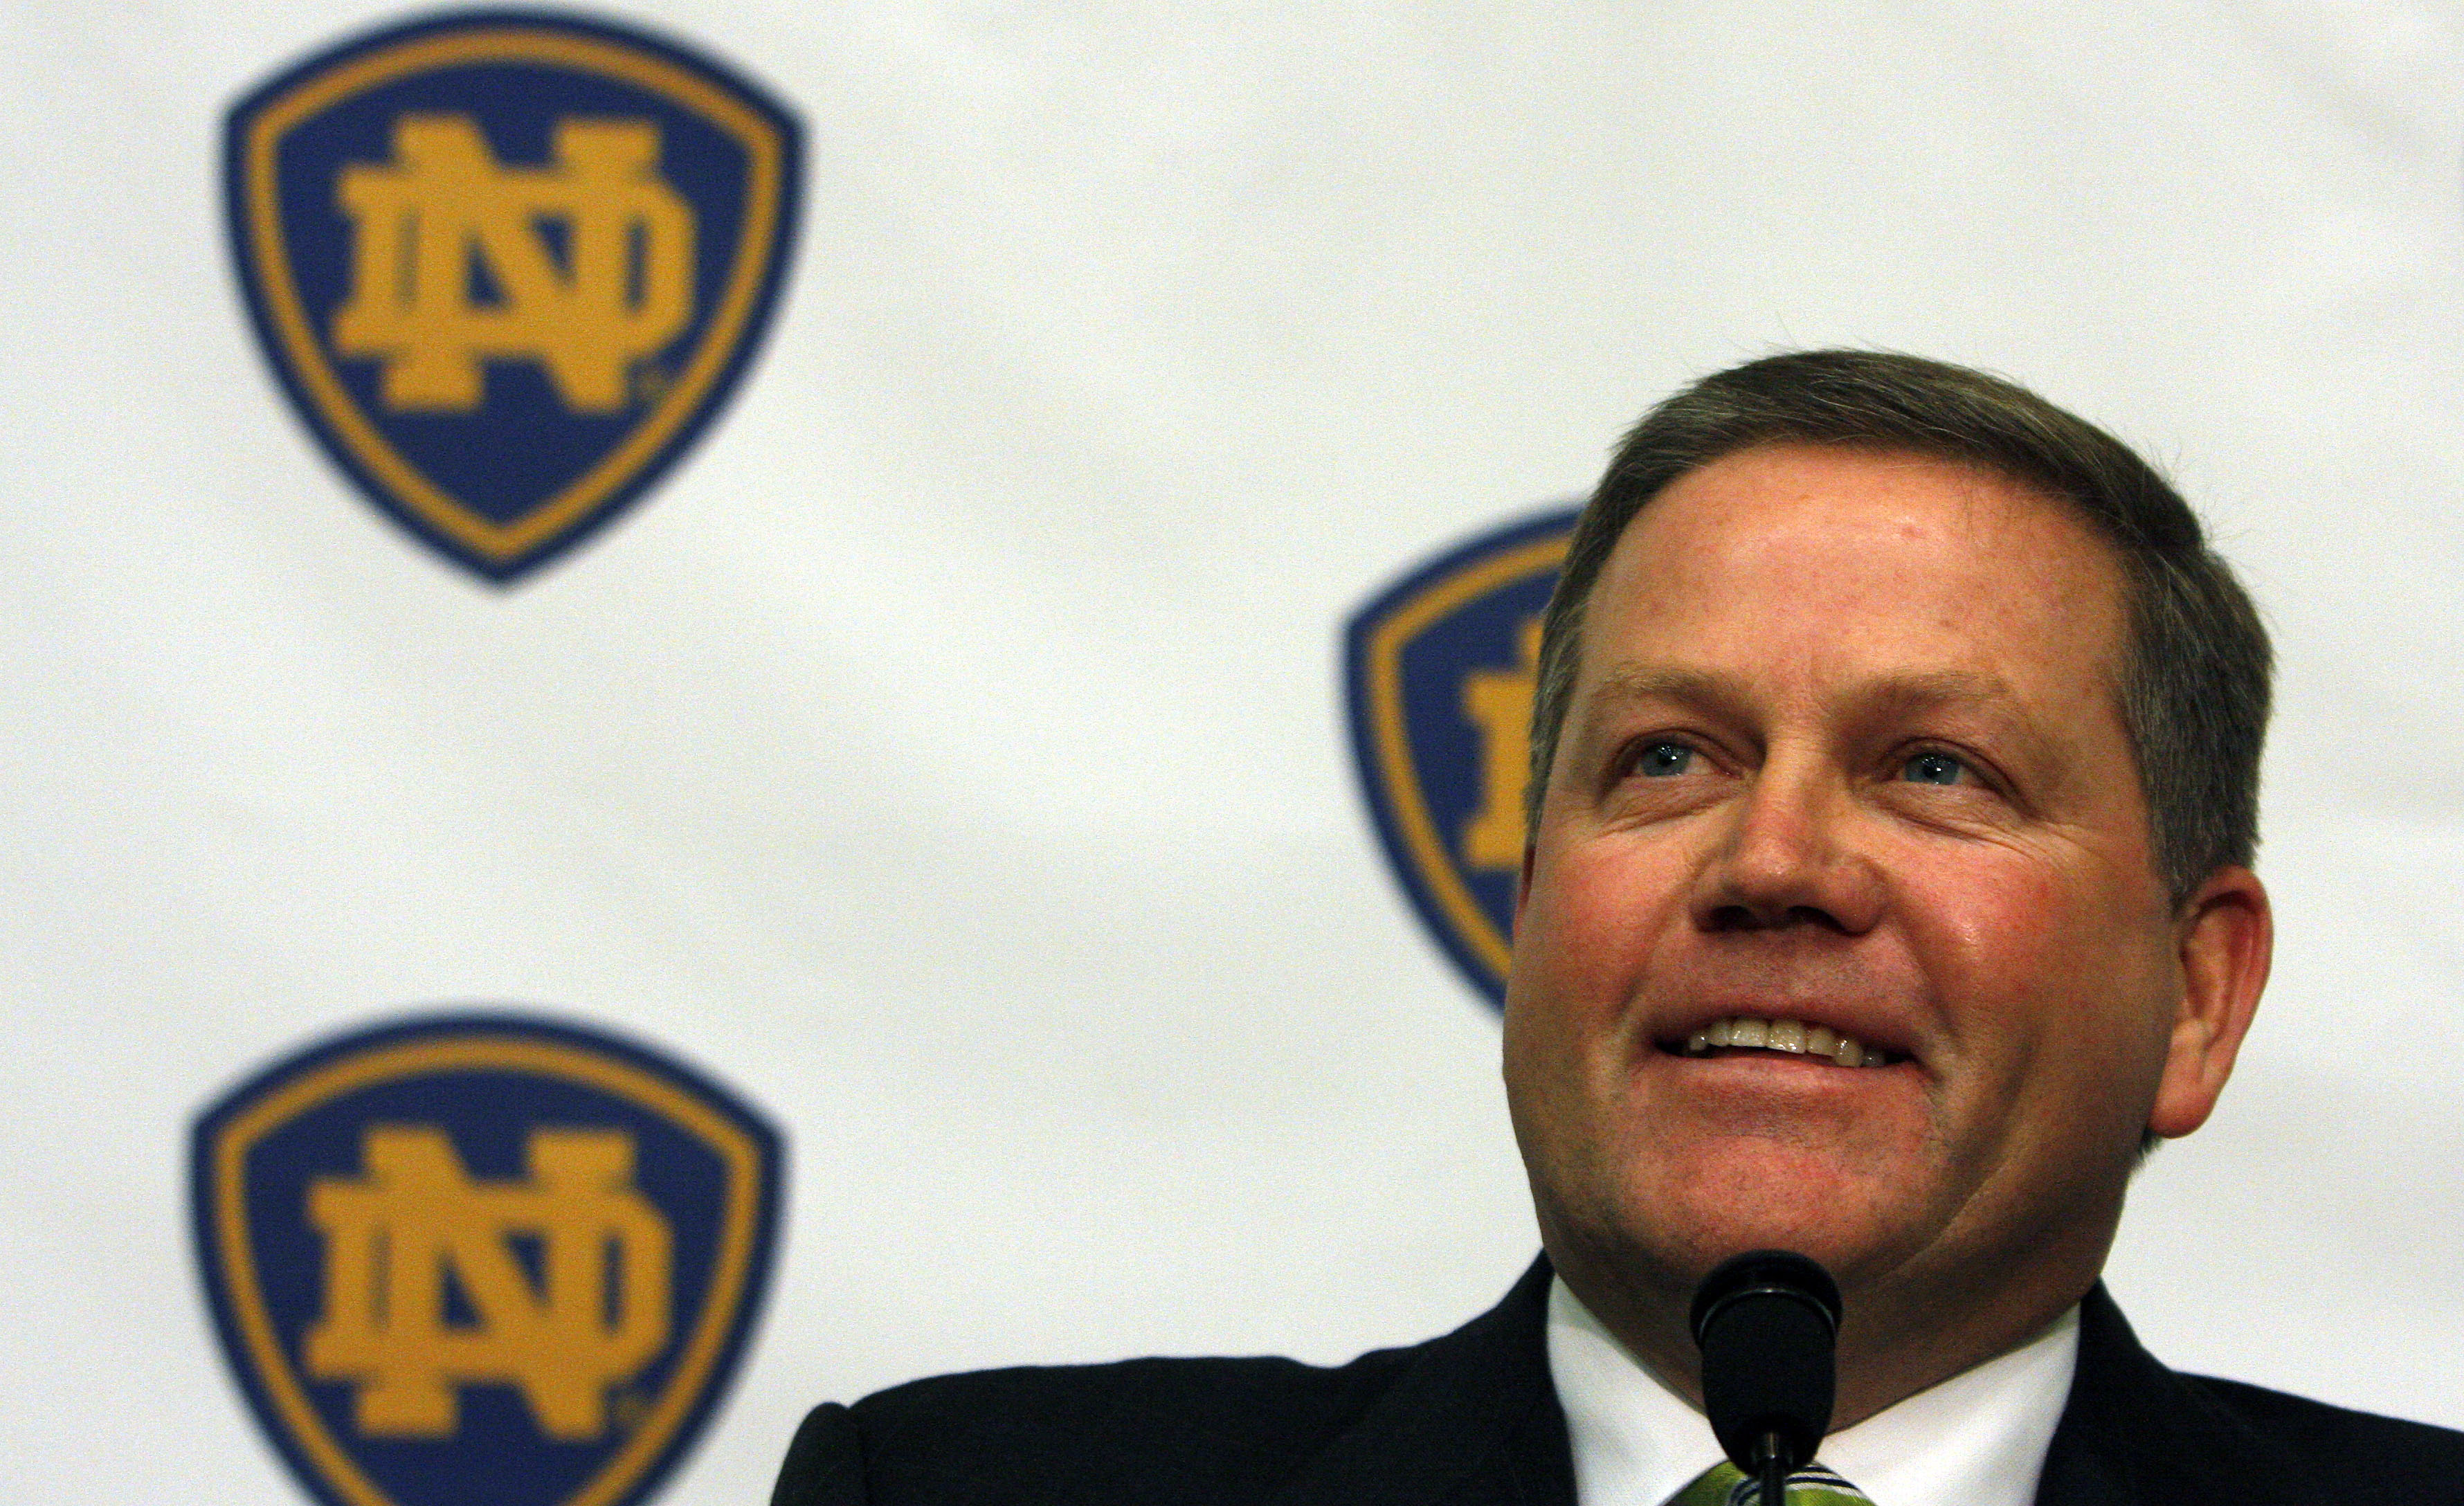 SOUTH BEND, IN - DECEMBER 11: Brian Kelly attends a press conference where he was named new football head coach at Notre Dame University on December 11, 2009 in South Bend, Indiana.  Kelly most recently led the University of Cincinnati to two consecutive